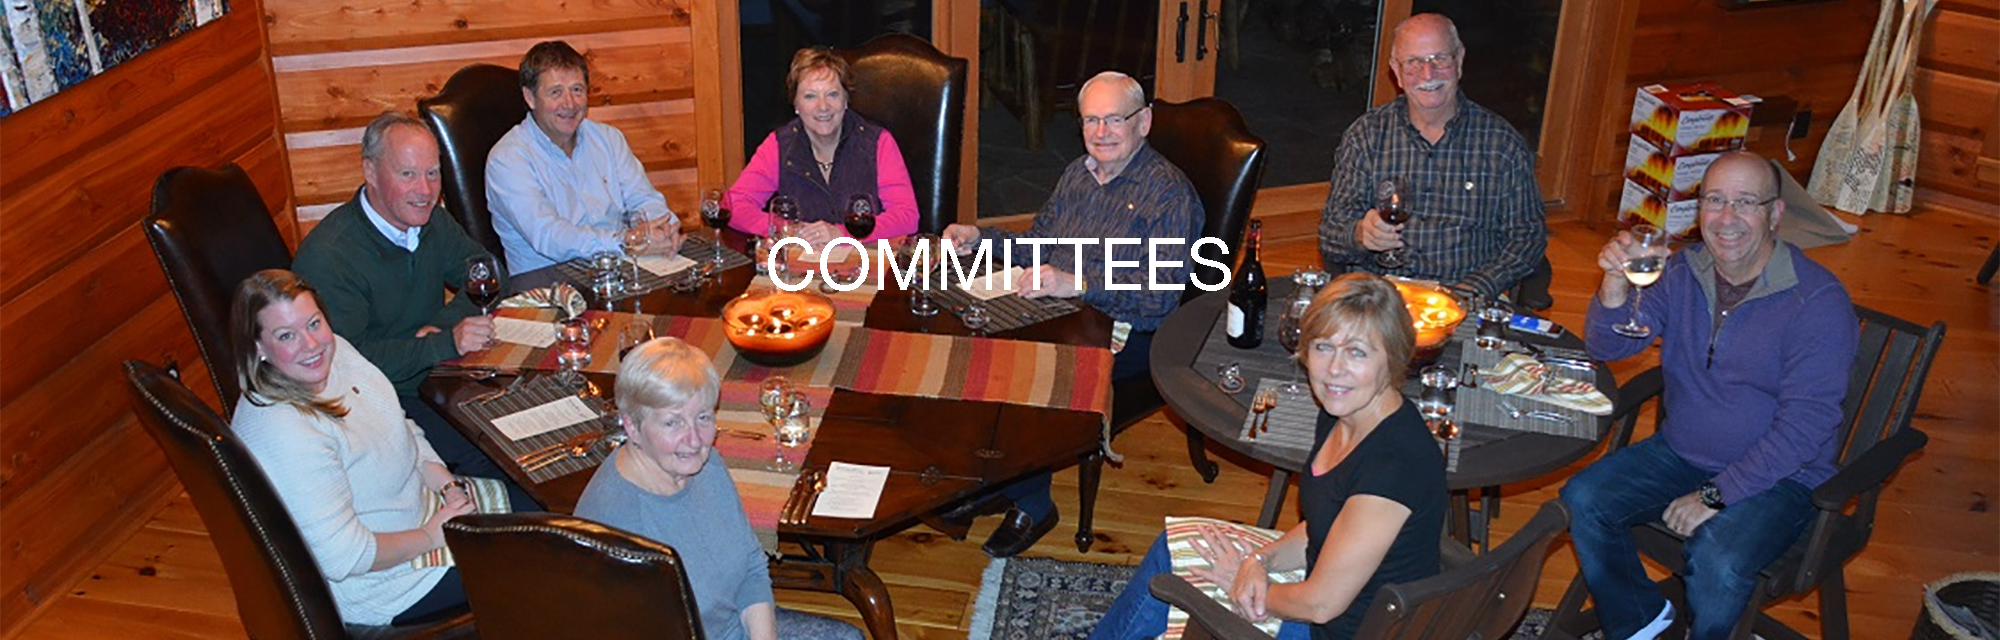 Cobourg Rotary Committees